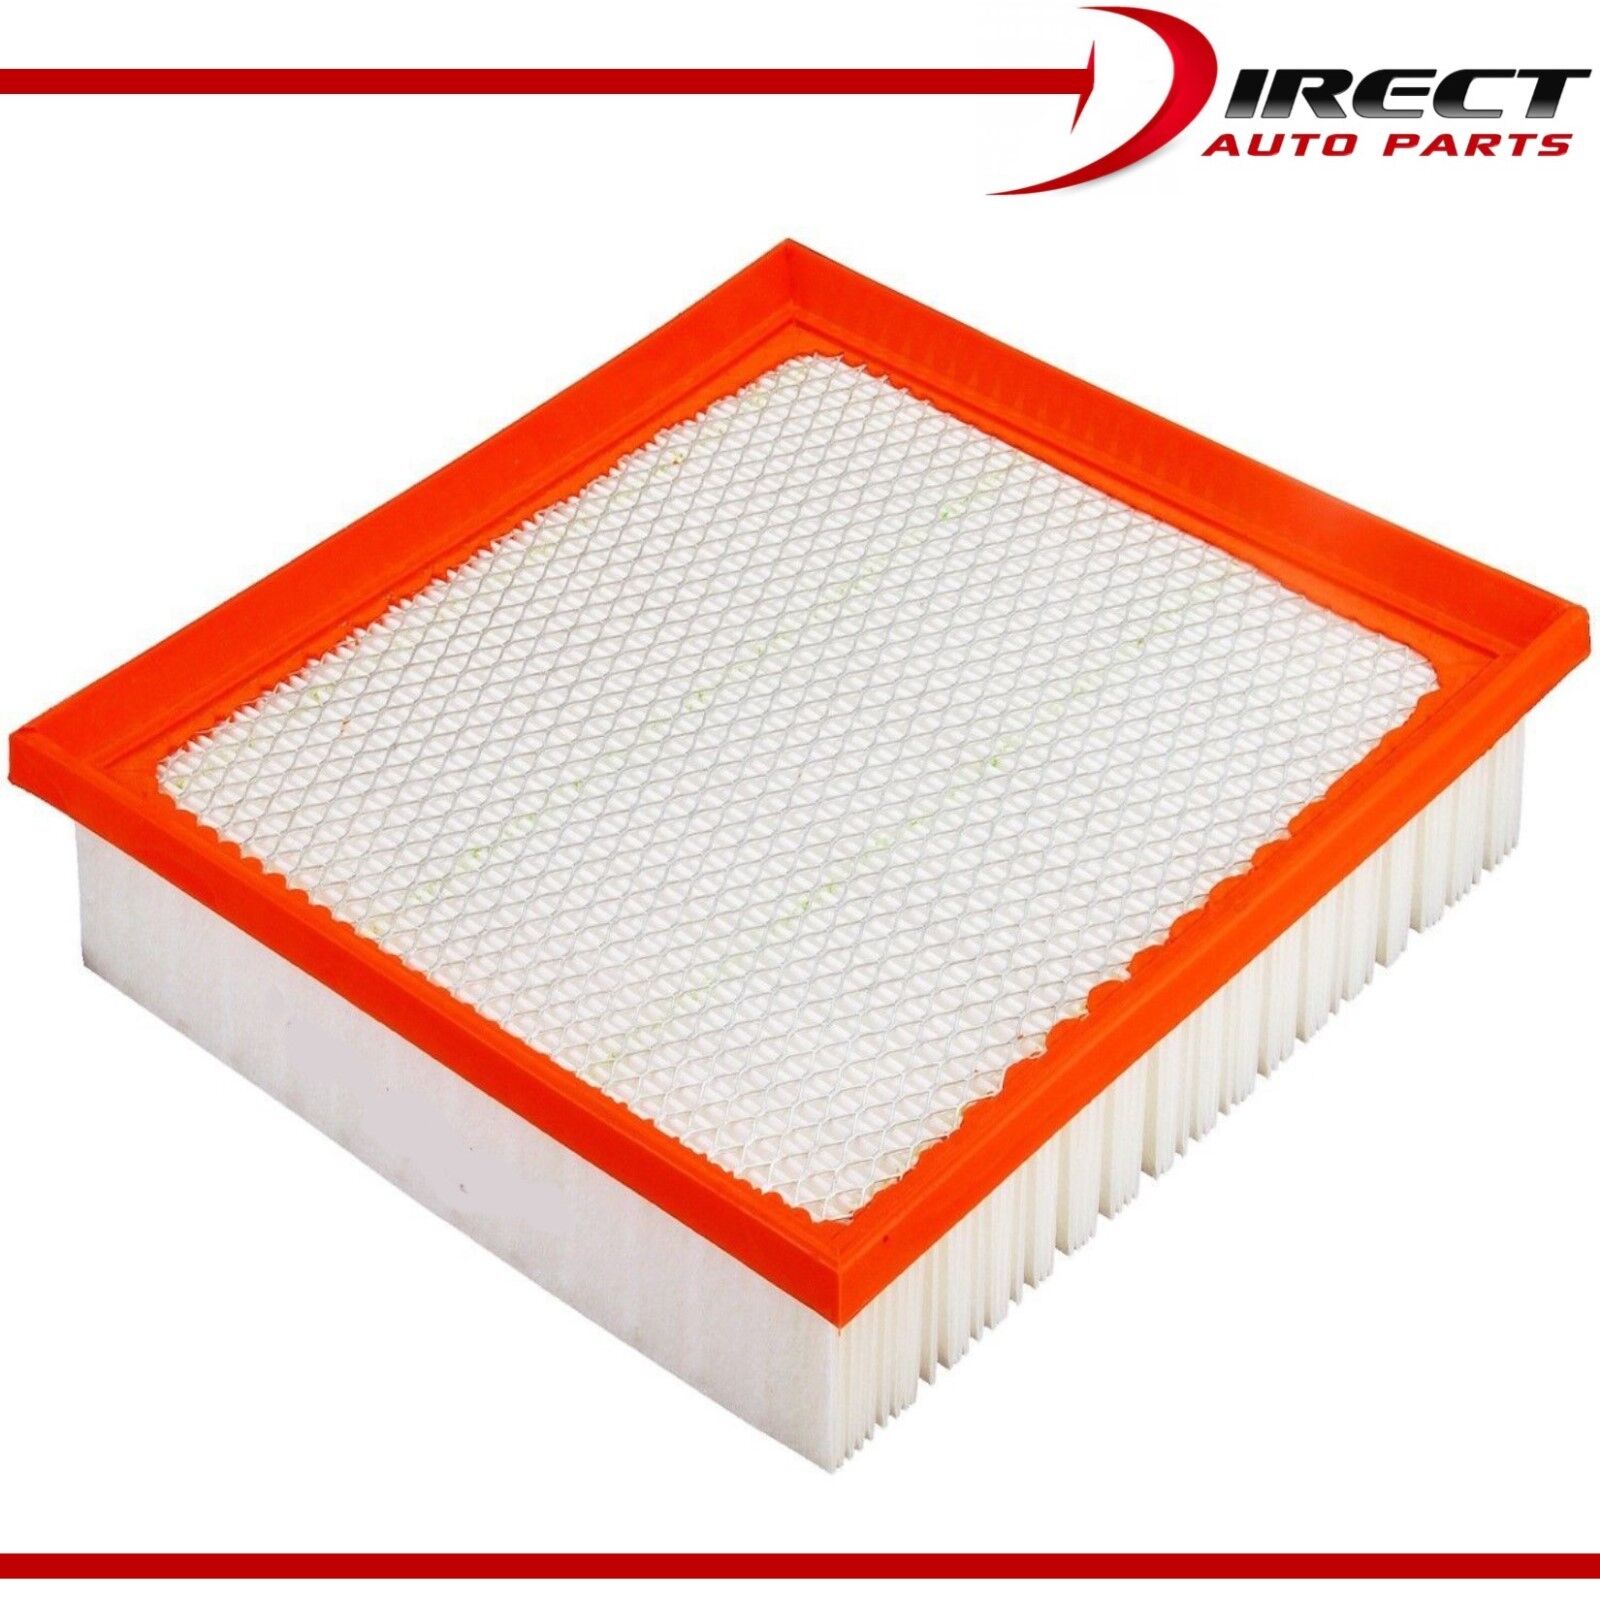 AF6121 Engine Air Filter For Dodge Journey 2009 - 2017 Replaces 4891916AA